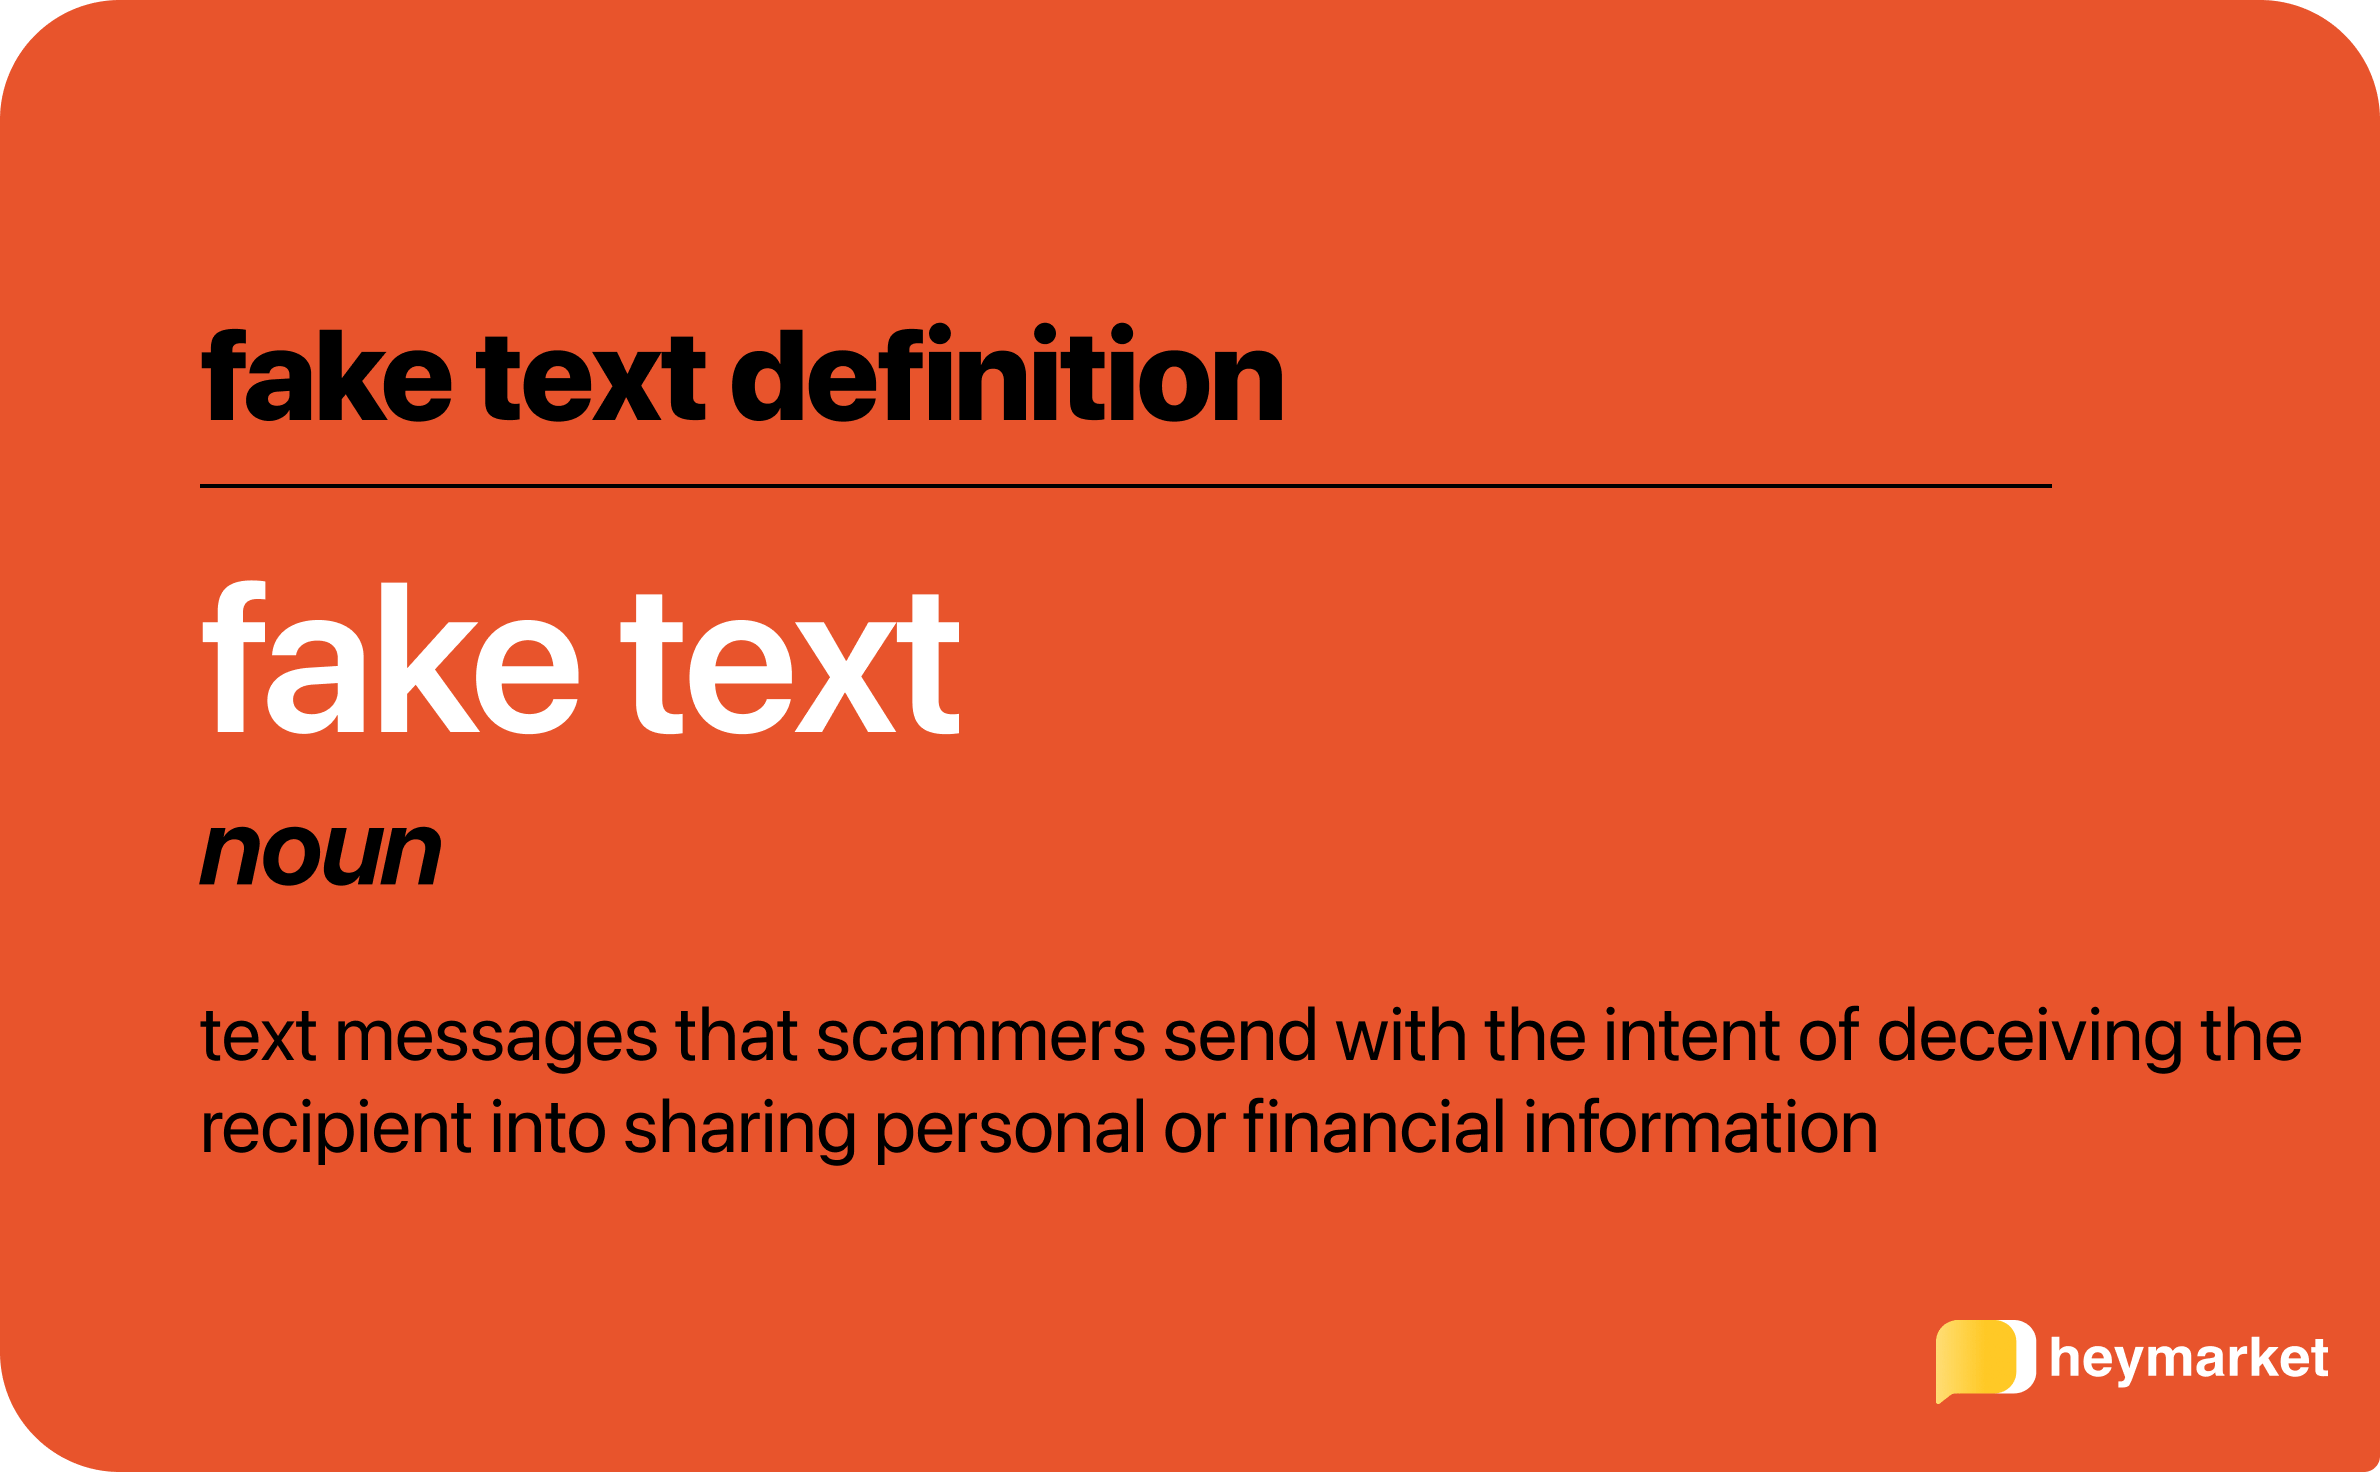 Fake text definition